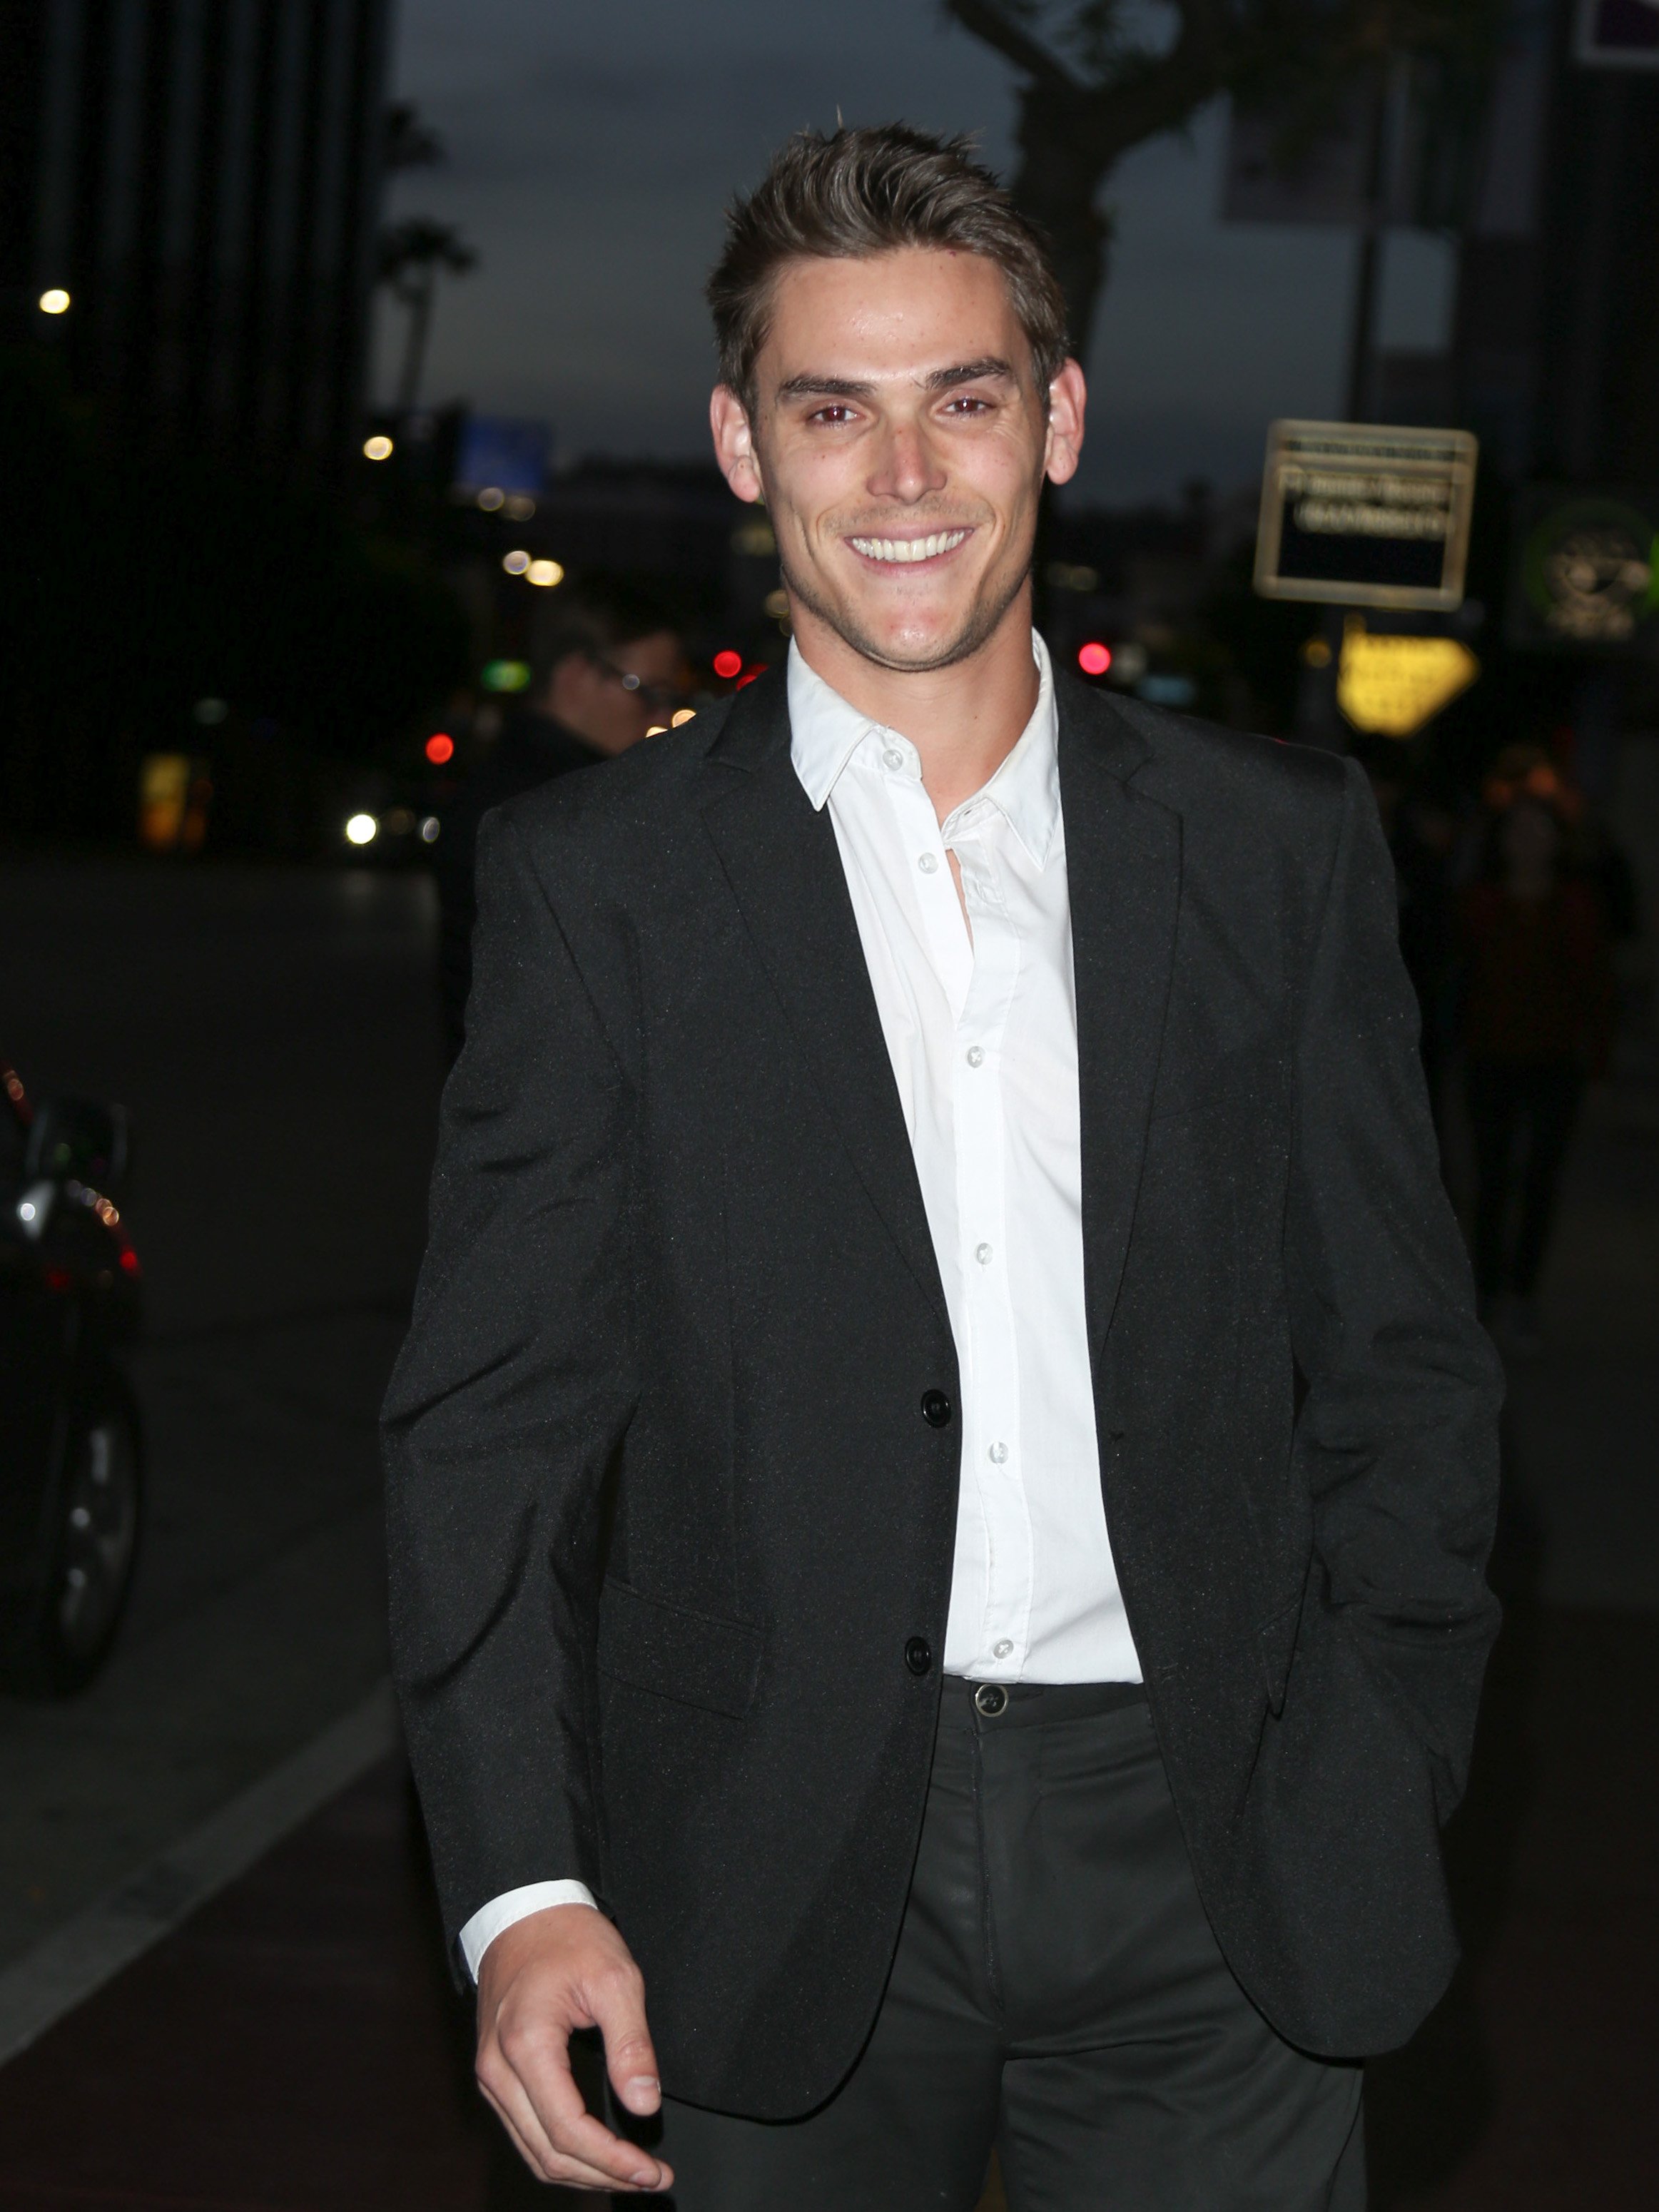 'The Young and the Restless' actor Mark Grossman wearing a black suit and white shirt; standing on the street.